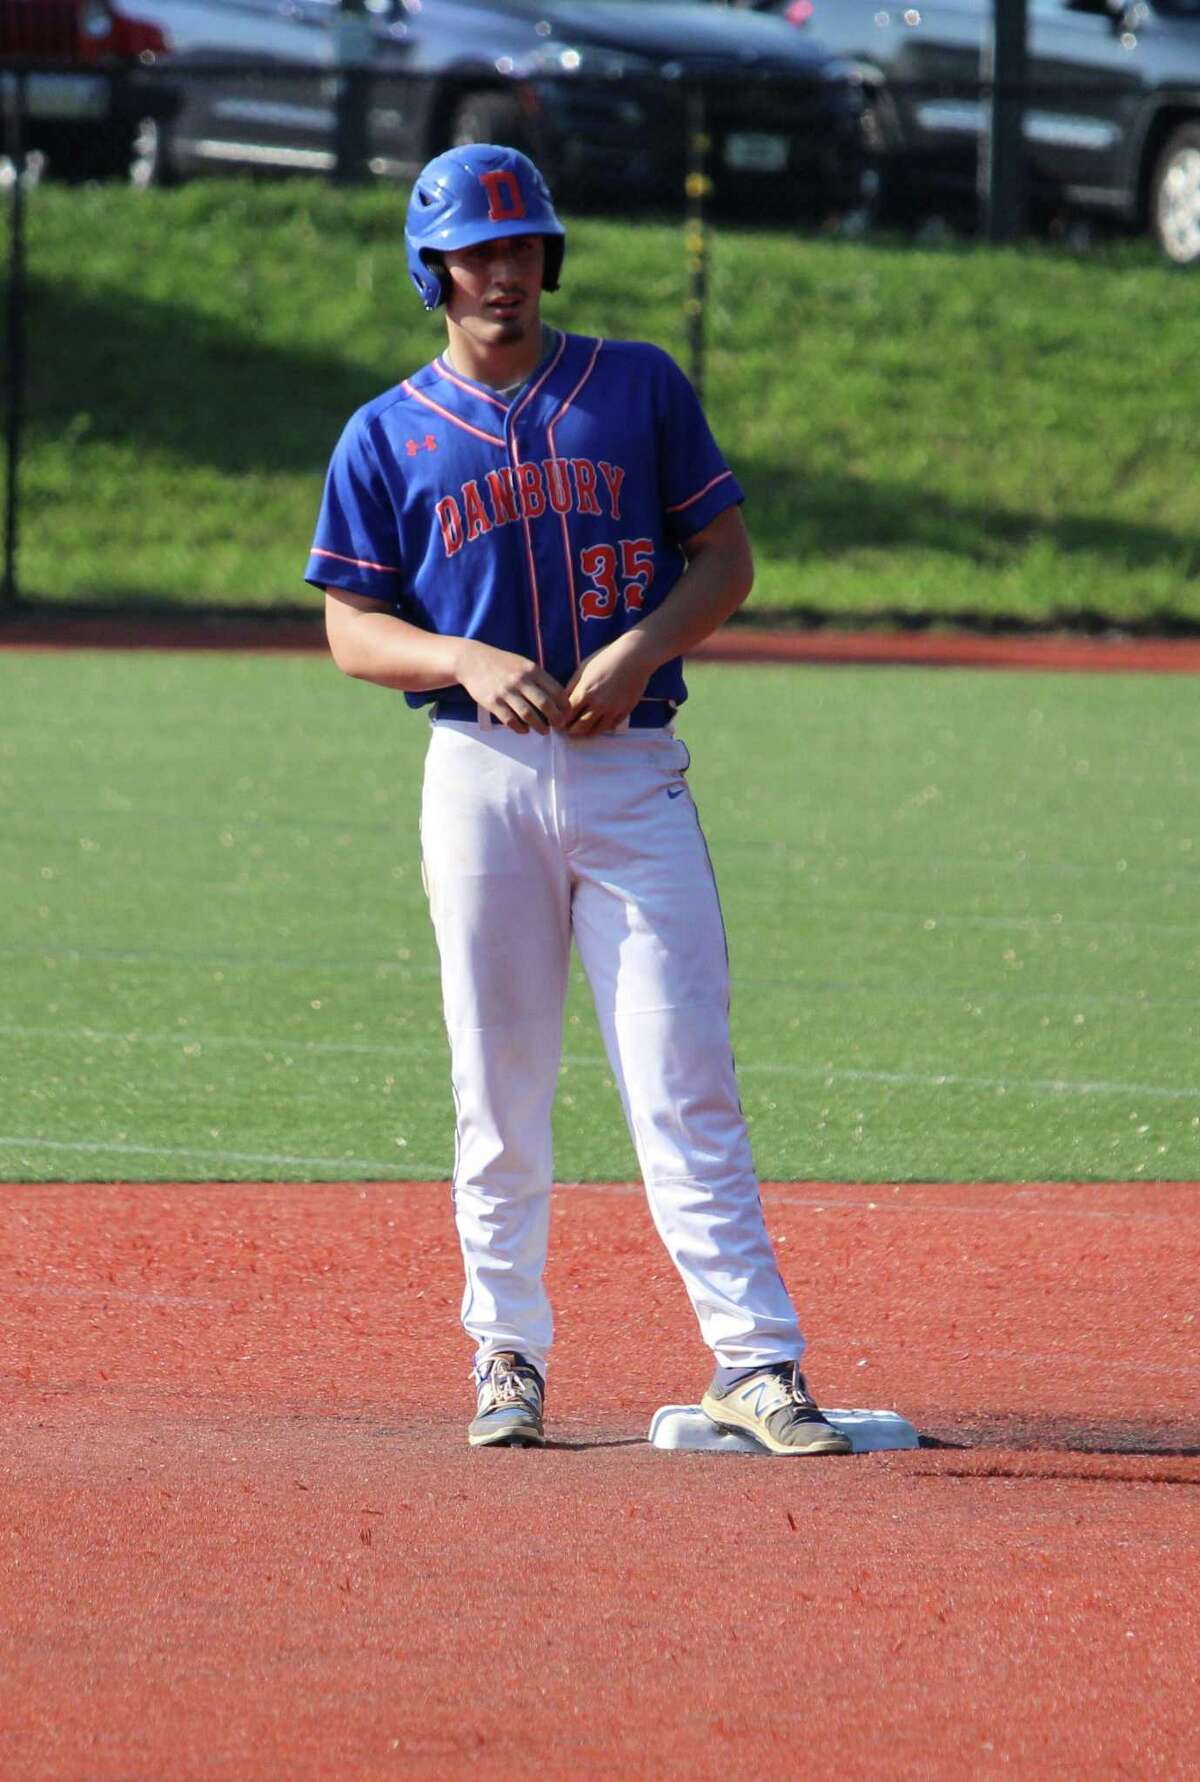 Danbury's Justin Solimine stands on second after an RBI base-hit during a Class LL state playoff baseball game between Darien and Danbury at Darien High School in Darien, Conn on May 28, 2018. Danbury defeated Darien 7-3.